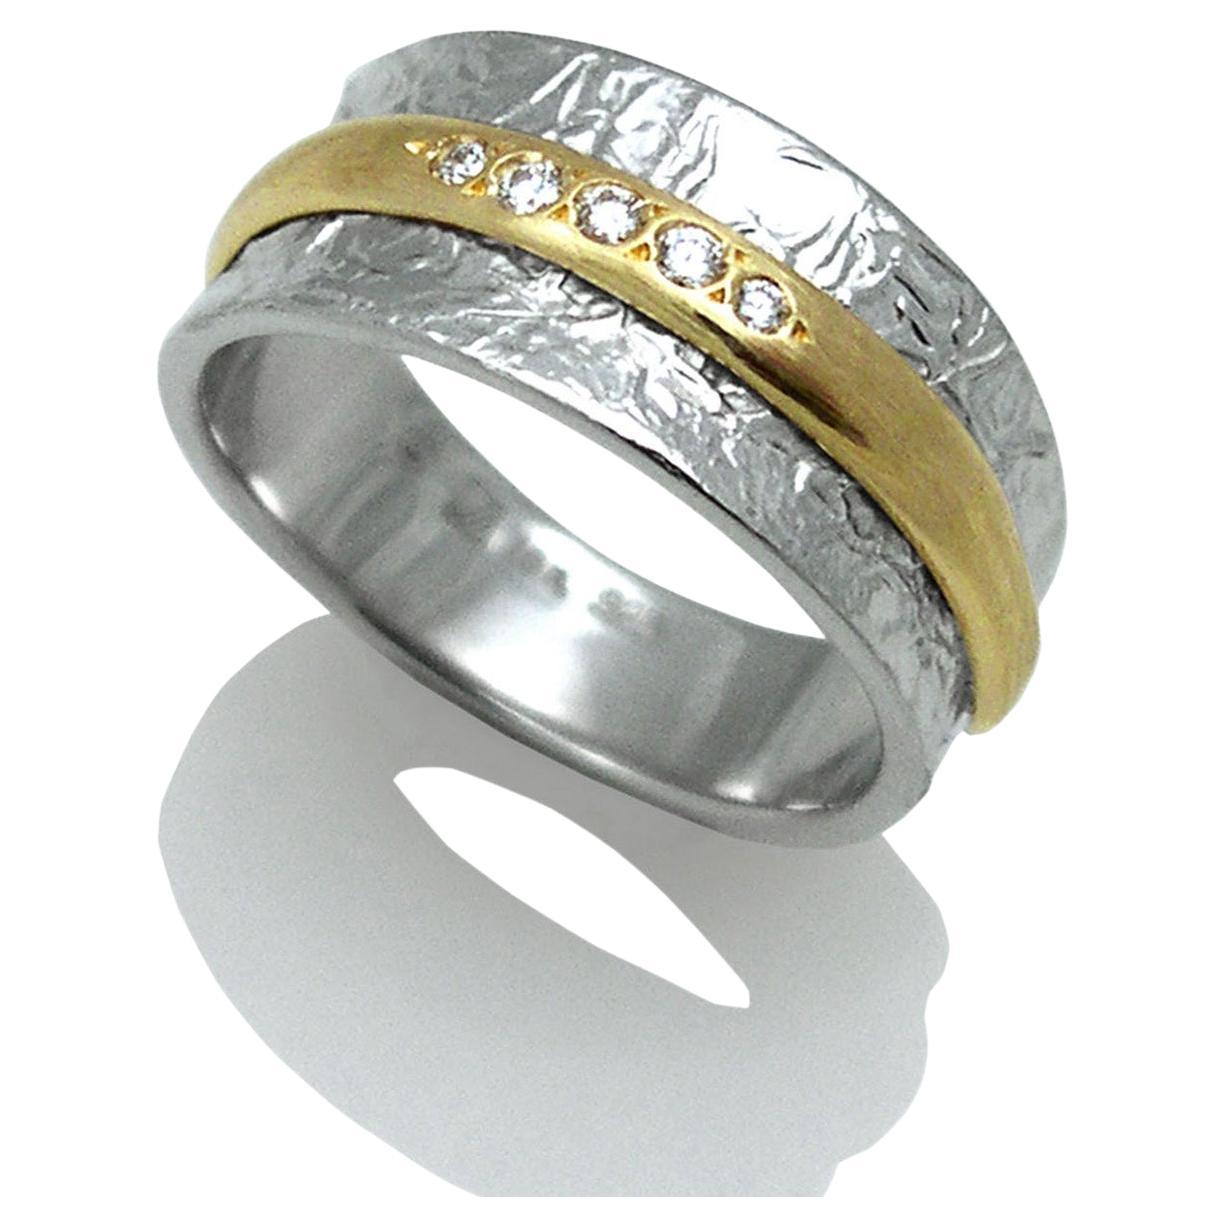 For Sale:  Keiko Mita 18 Karat Yellow Gold and Sterling Silver Duo Band with Diamonds